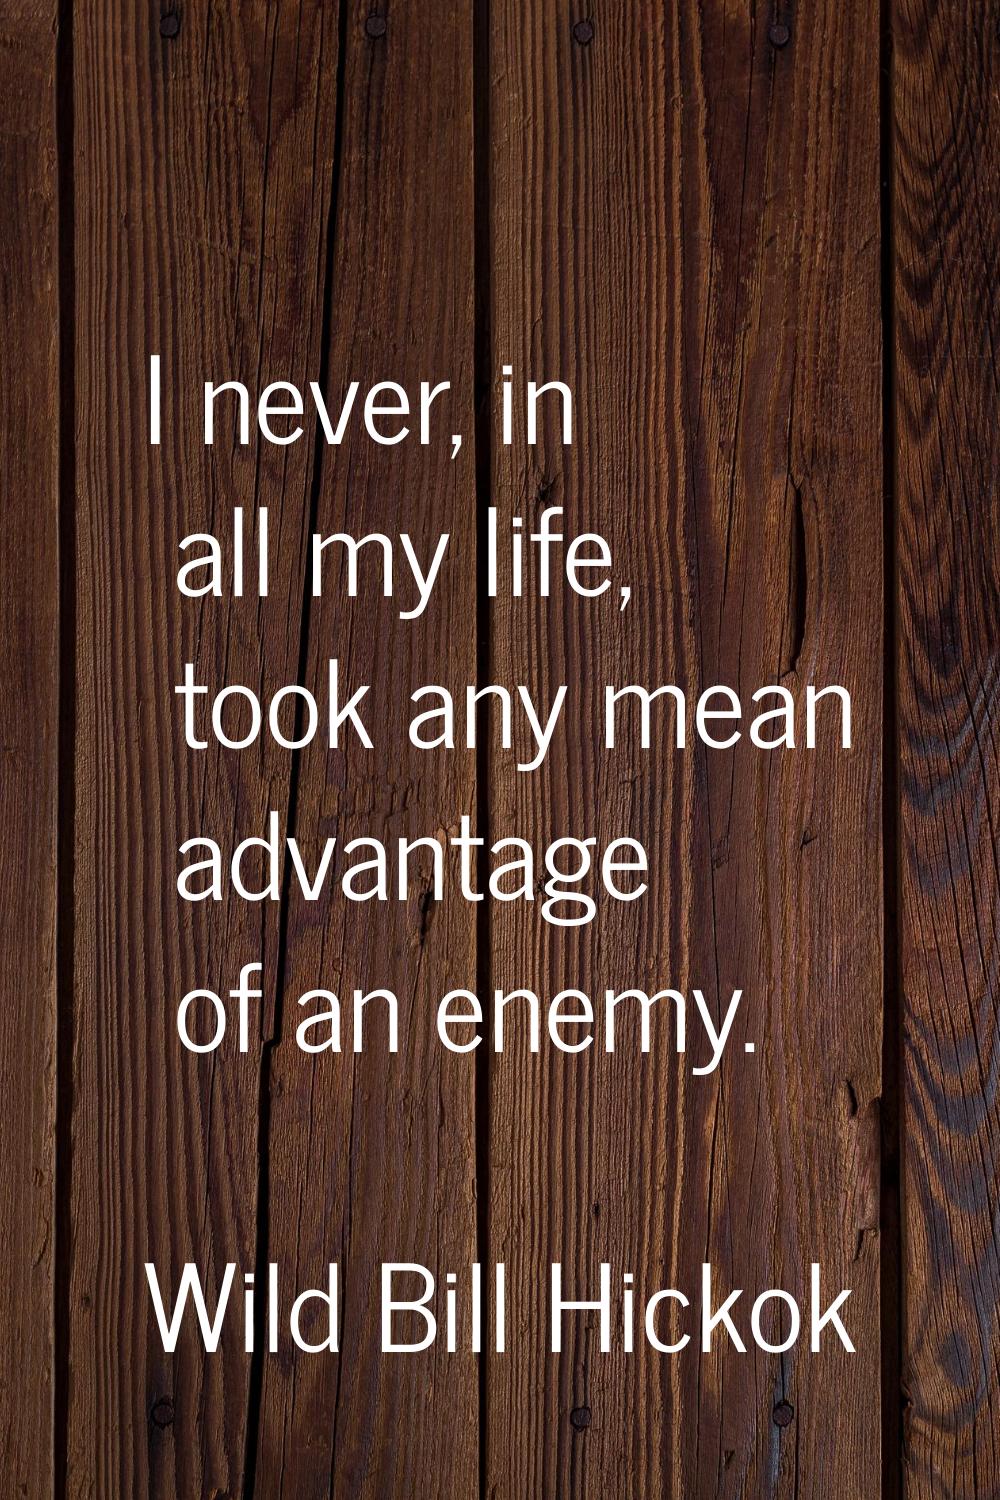 I never, in all my life, took any mean advantage of an enemy.